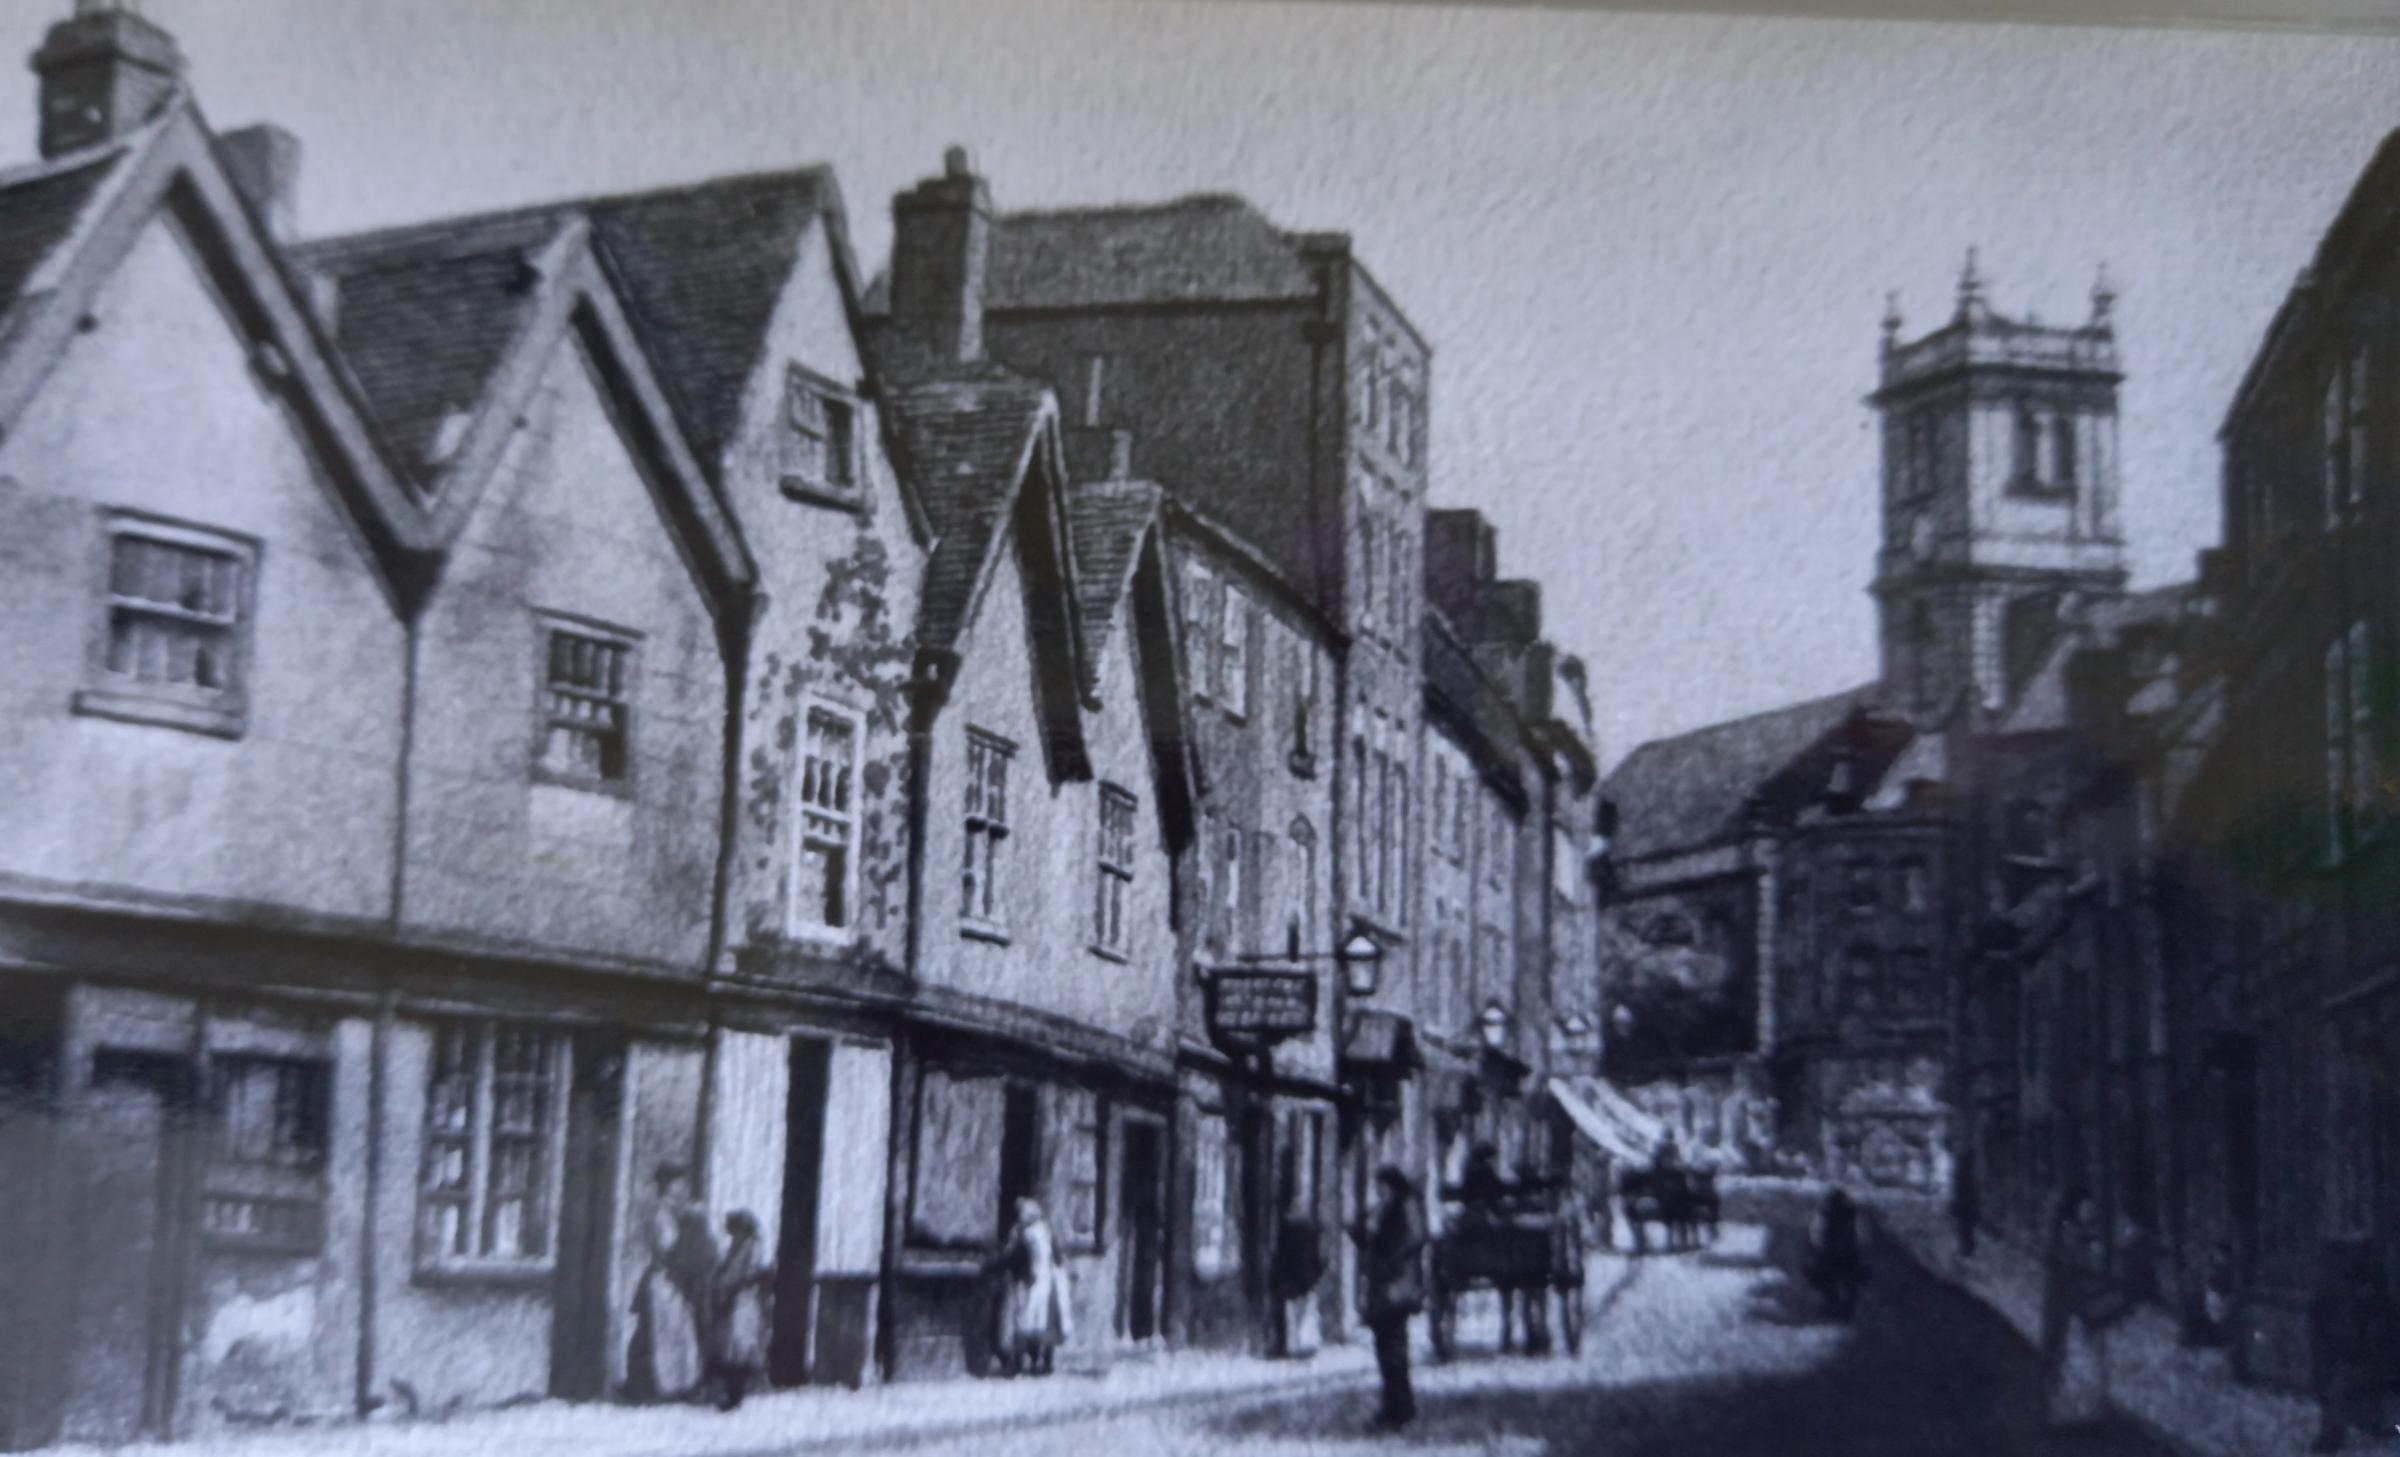 The original Newport Street pictured in 1905 looking up towards All Saints church